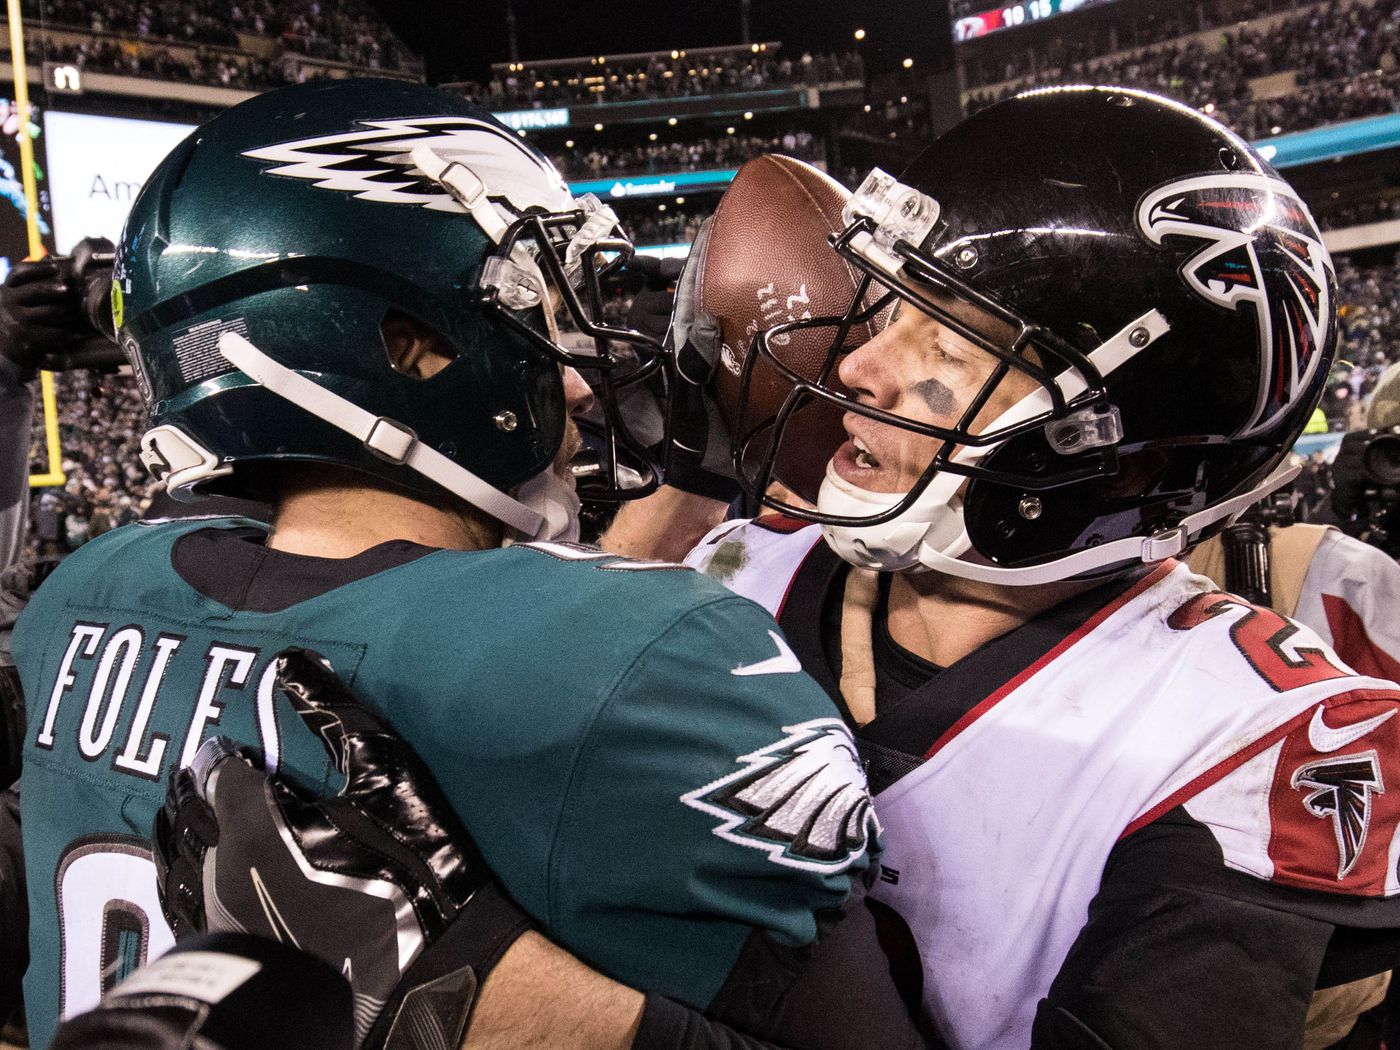 Eagles-Falcons: Start time, channel, how to watch and stream